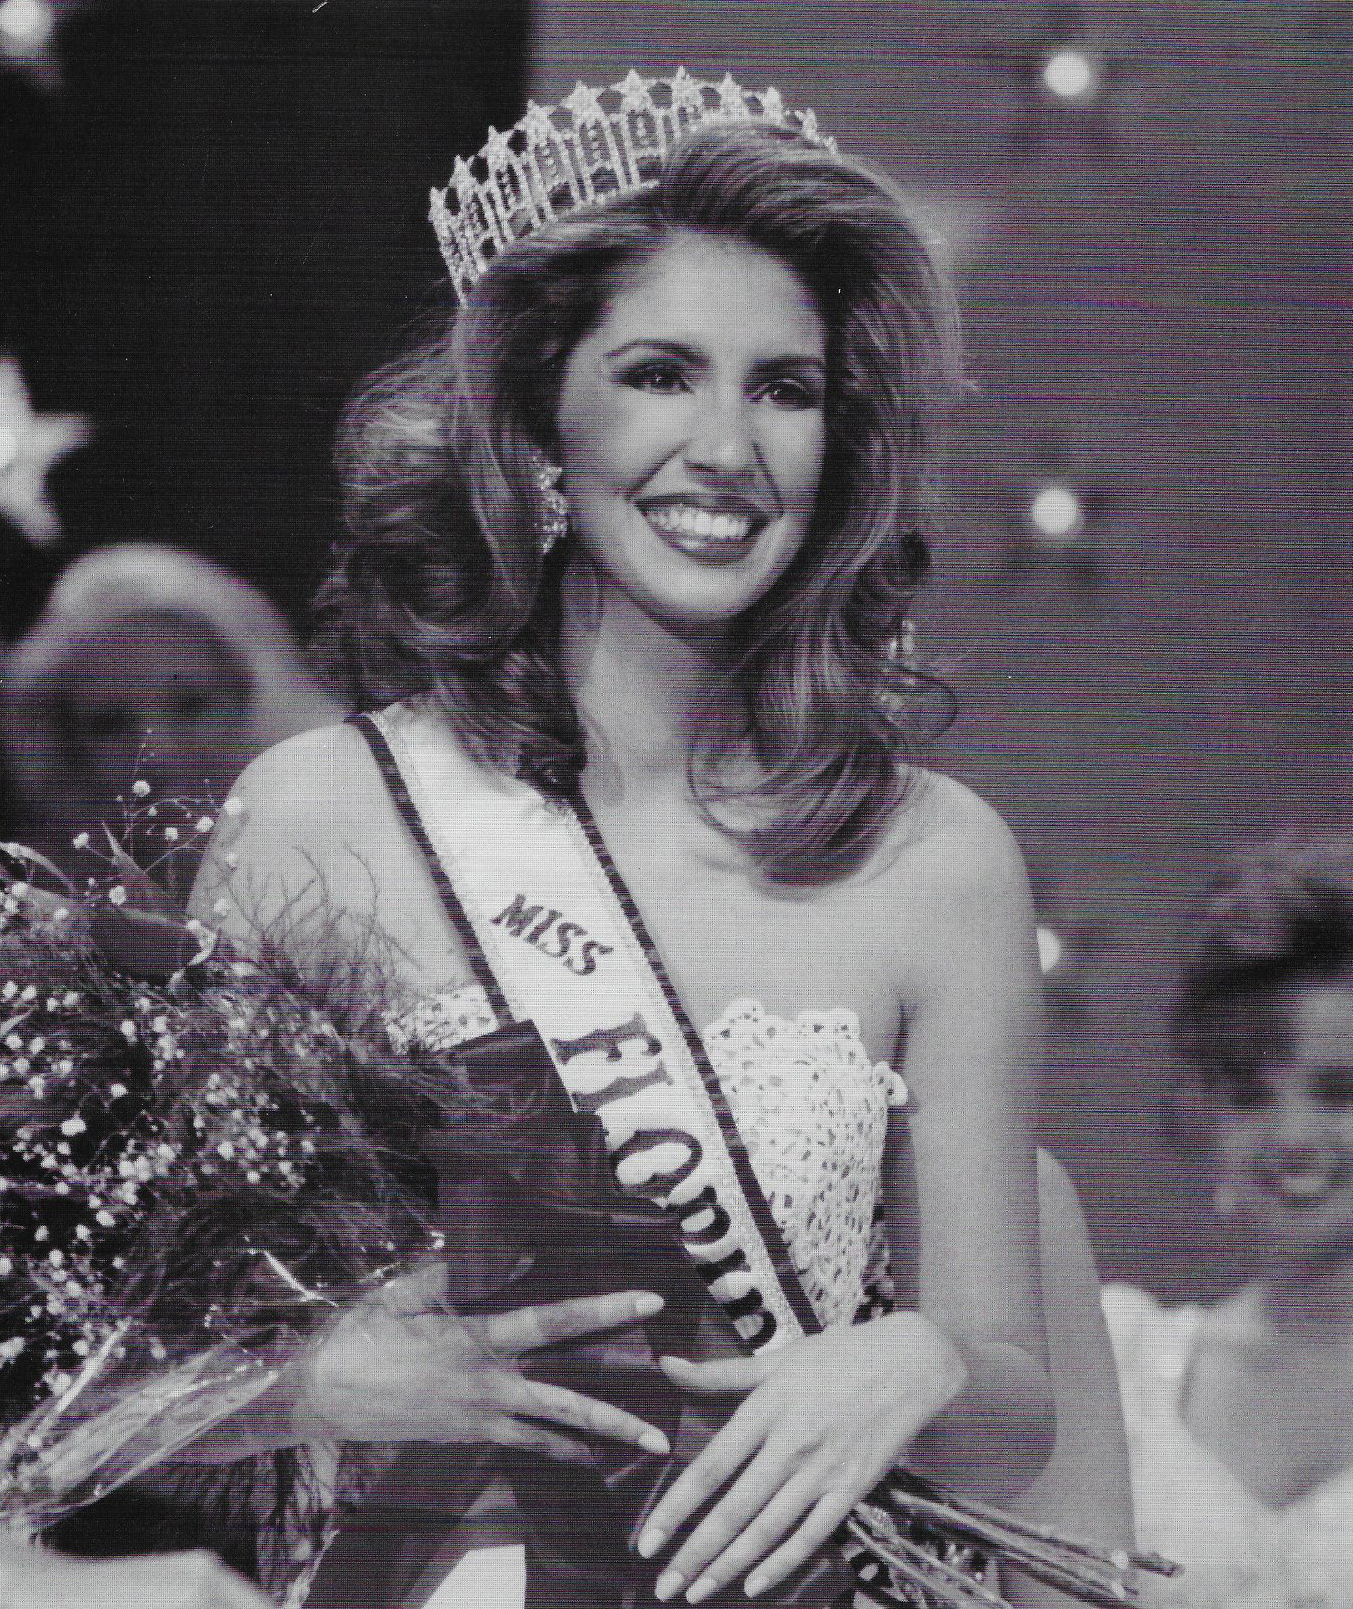 Miss-Florida-USA-1996-pageant-01